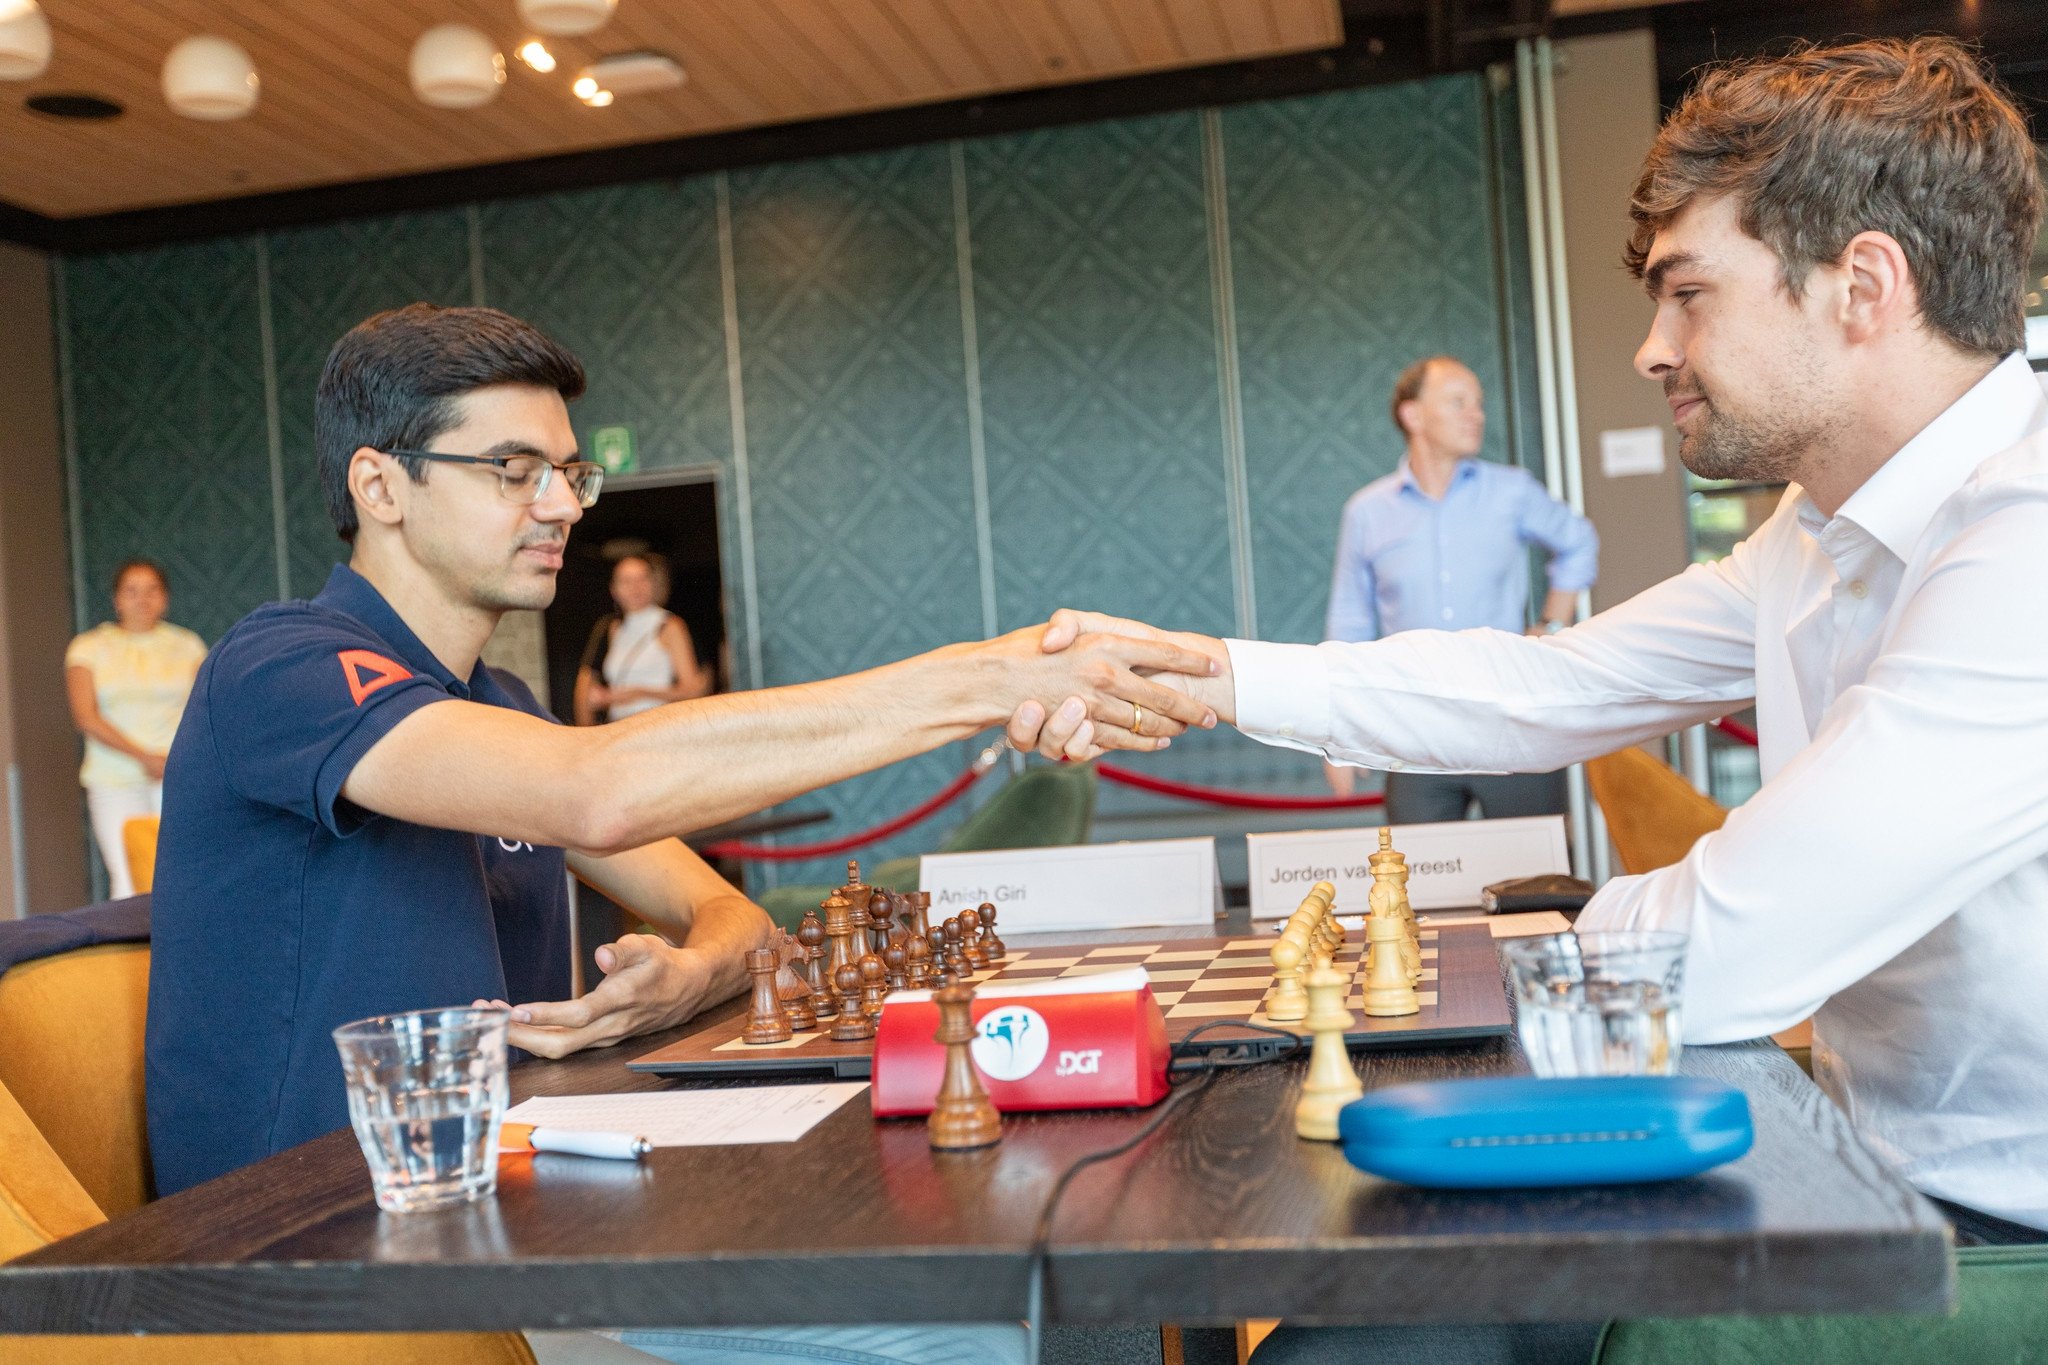 ChessBase India on X: Big congratulations to Grandmaster Anish Giri for  winning the Dutch Championships! Anish defeated Jorden van Foreest 3.5-2.5  in the Final Blitz tiebreaks to clinch the title. This is